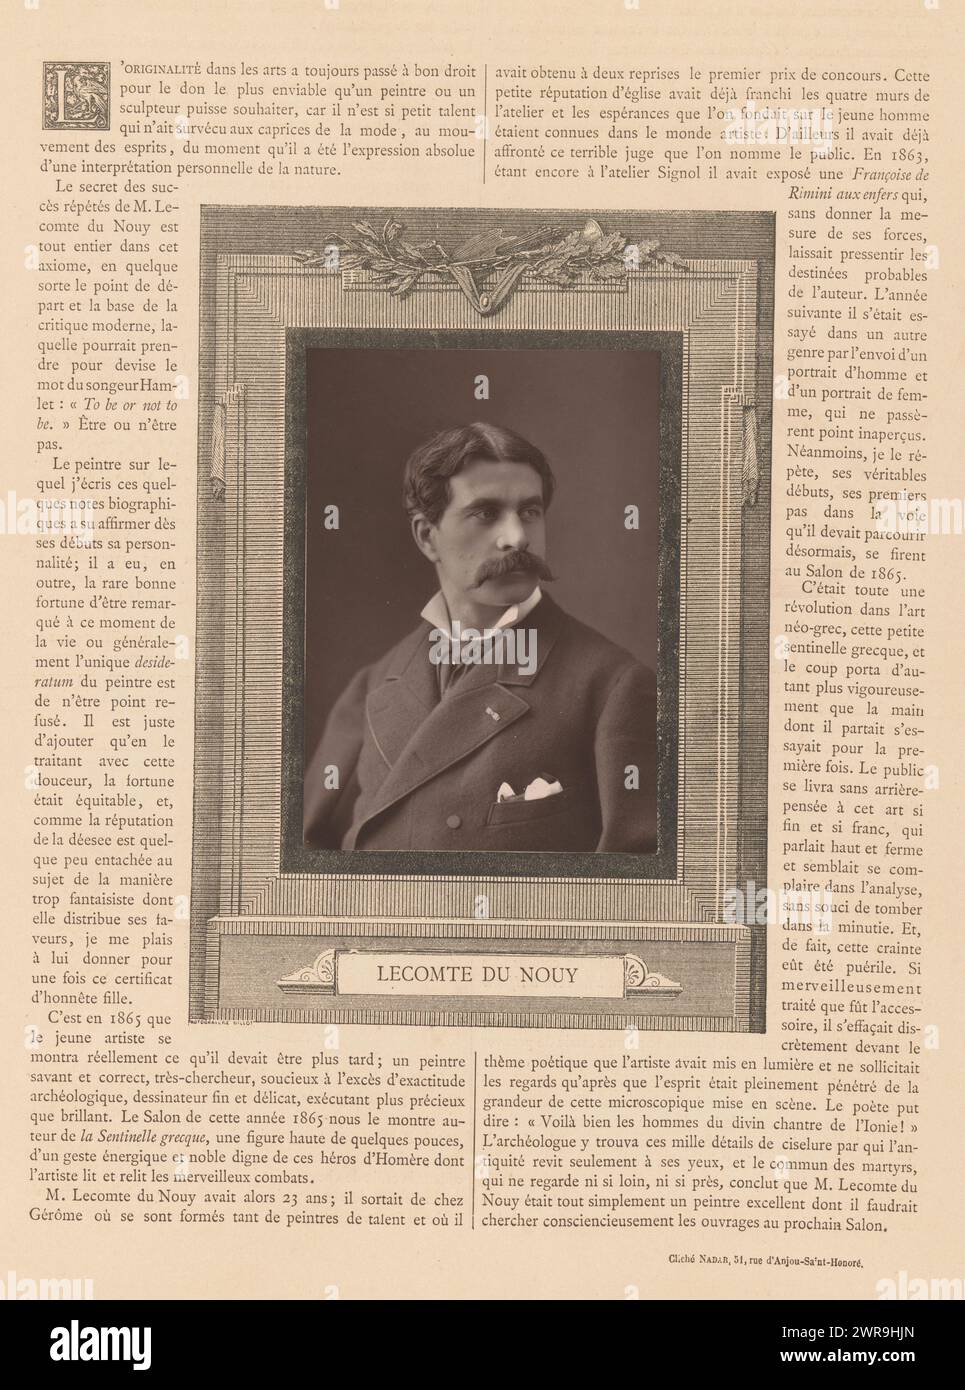 Portrait of Jean-Jules-Antoine Lecomte du Noüy, Lecomte du Nouy (title on object), Félix Nadar, Goupil & Cie., (attributed to), Charles Gillot, c. 1872 - in or before 1877, paper, height 188 mm × width 132 mm, photomechanical print Stock Photo